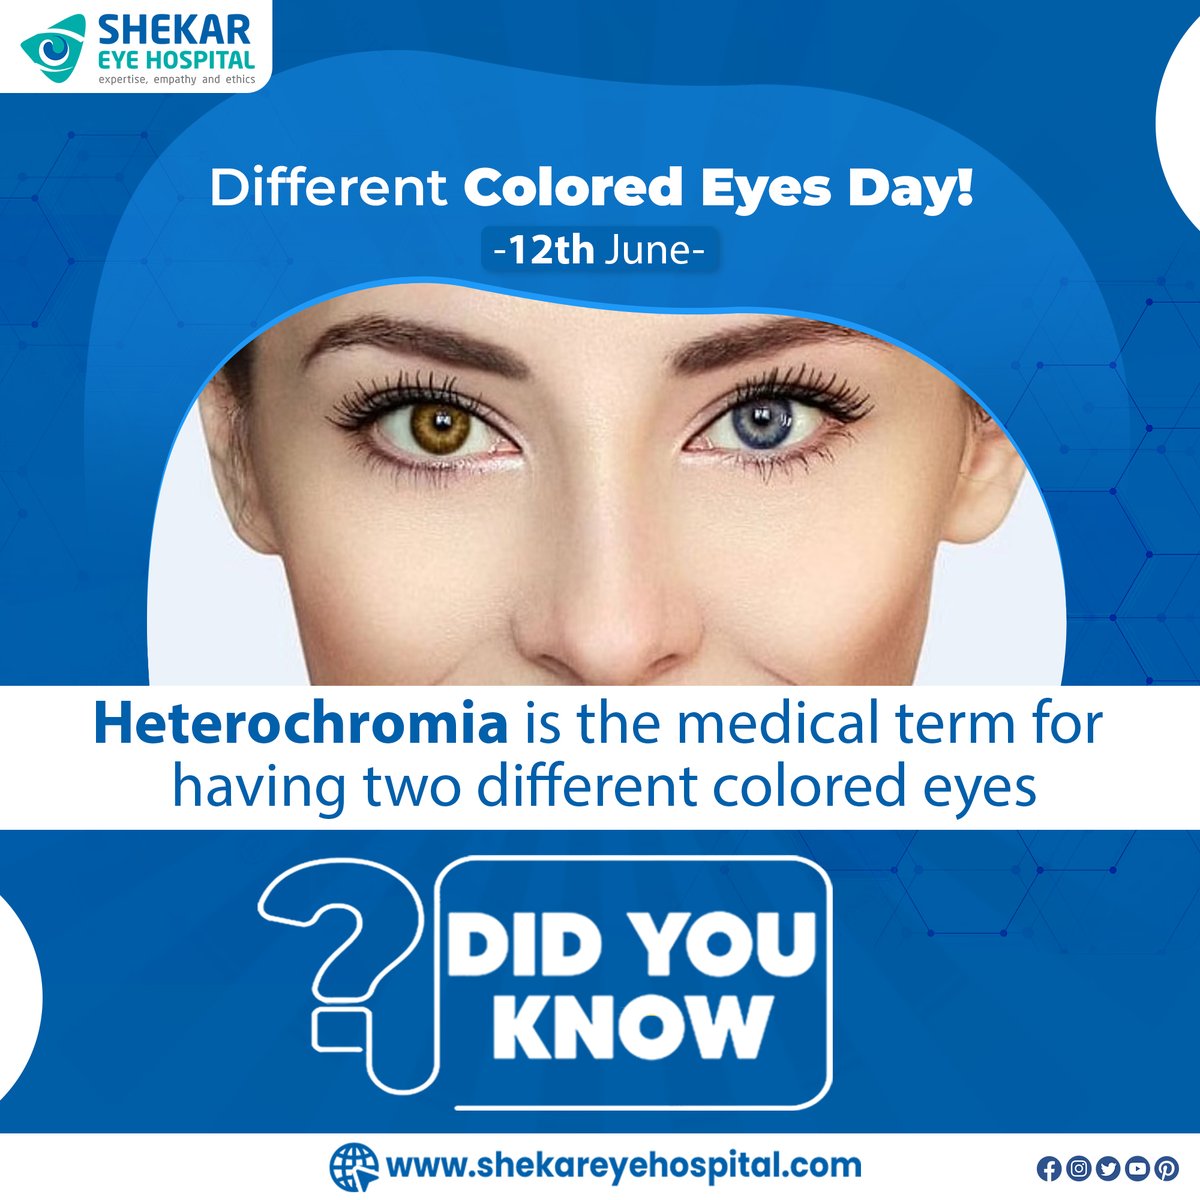 Unleash the magic of heterochromia on Differently Coloured Eyes Day. 

our website at shekareyehospital.com.

#ShekarEyeHospital #DifferentColoredEyesDay #Heterochromia #DifferentColoredEyes #BeautifulEyes #UniqueEyes #RareEyes #SpecialEyes #Oneofakindnd #RareBeauty